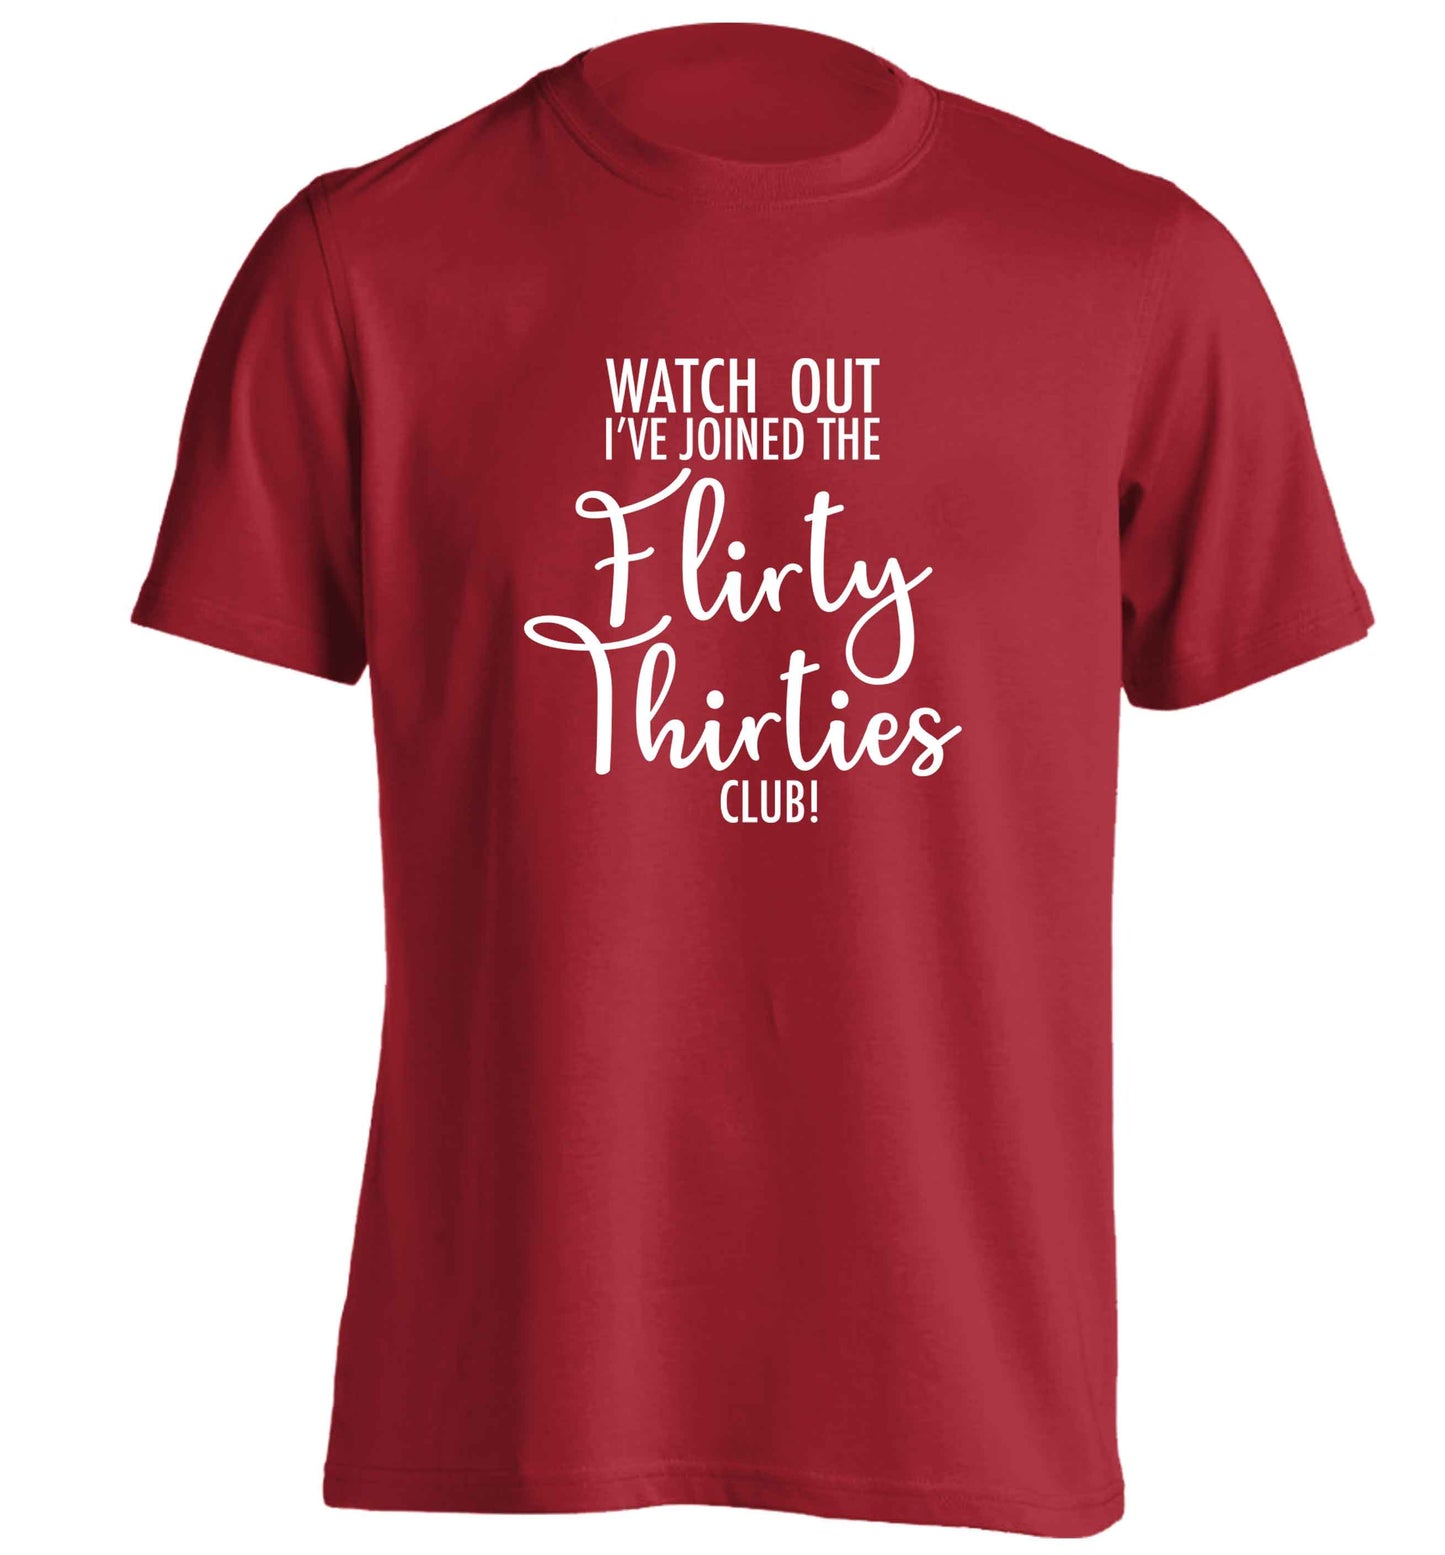 Watch out I've joined the flirty thirties club adults unisex red Tshirt 2XL